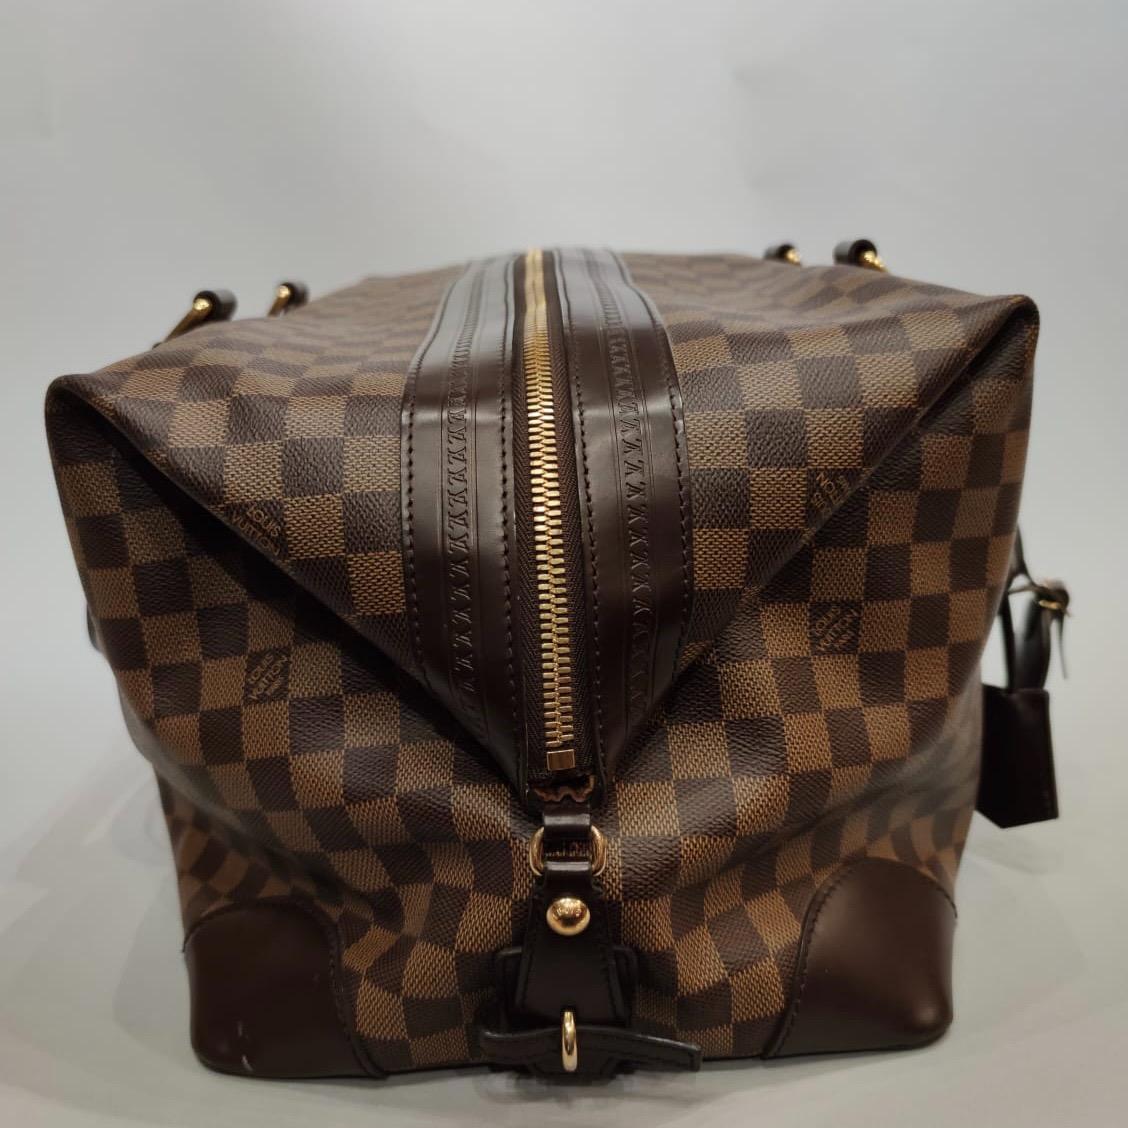 LOUIS VUITTON NEVERFULL - Des Voyages - Recent Added Items